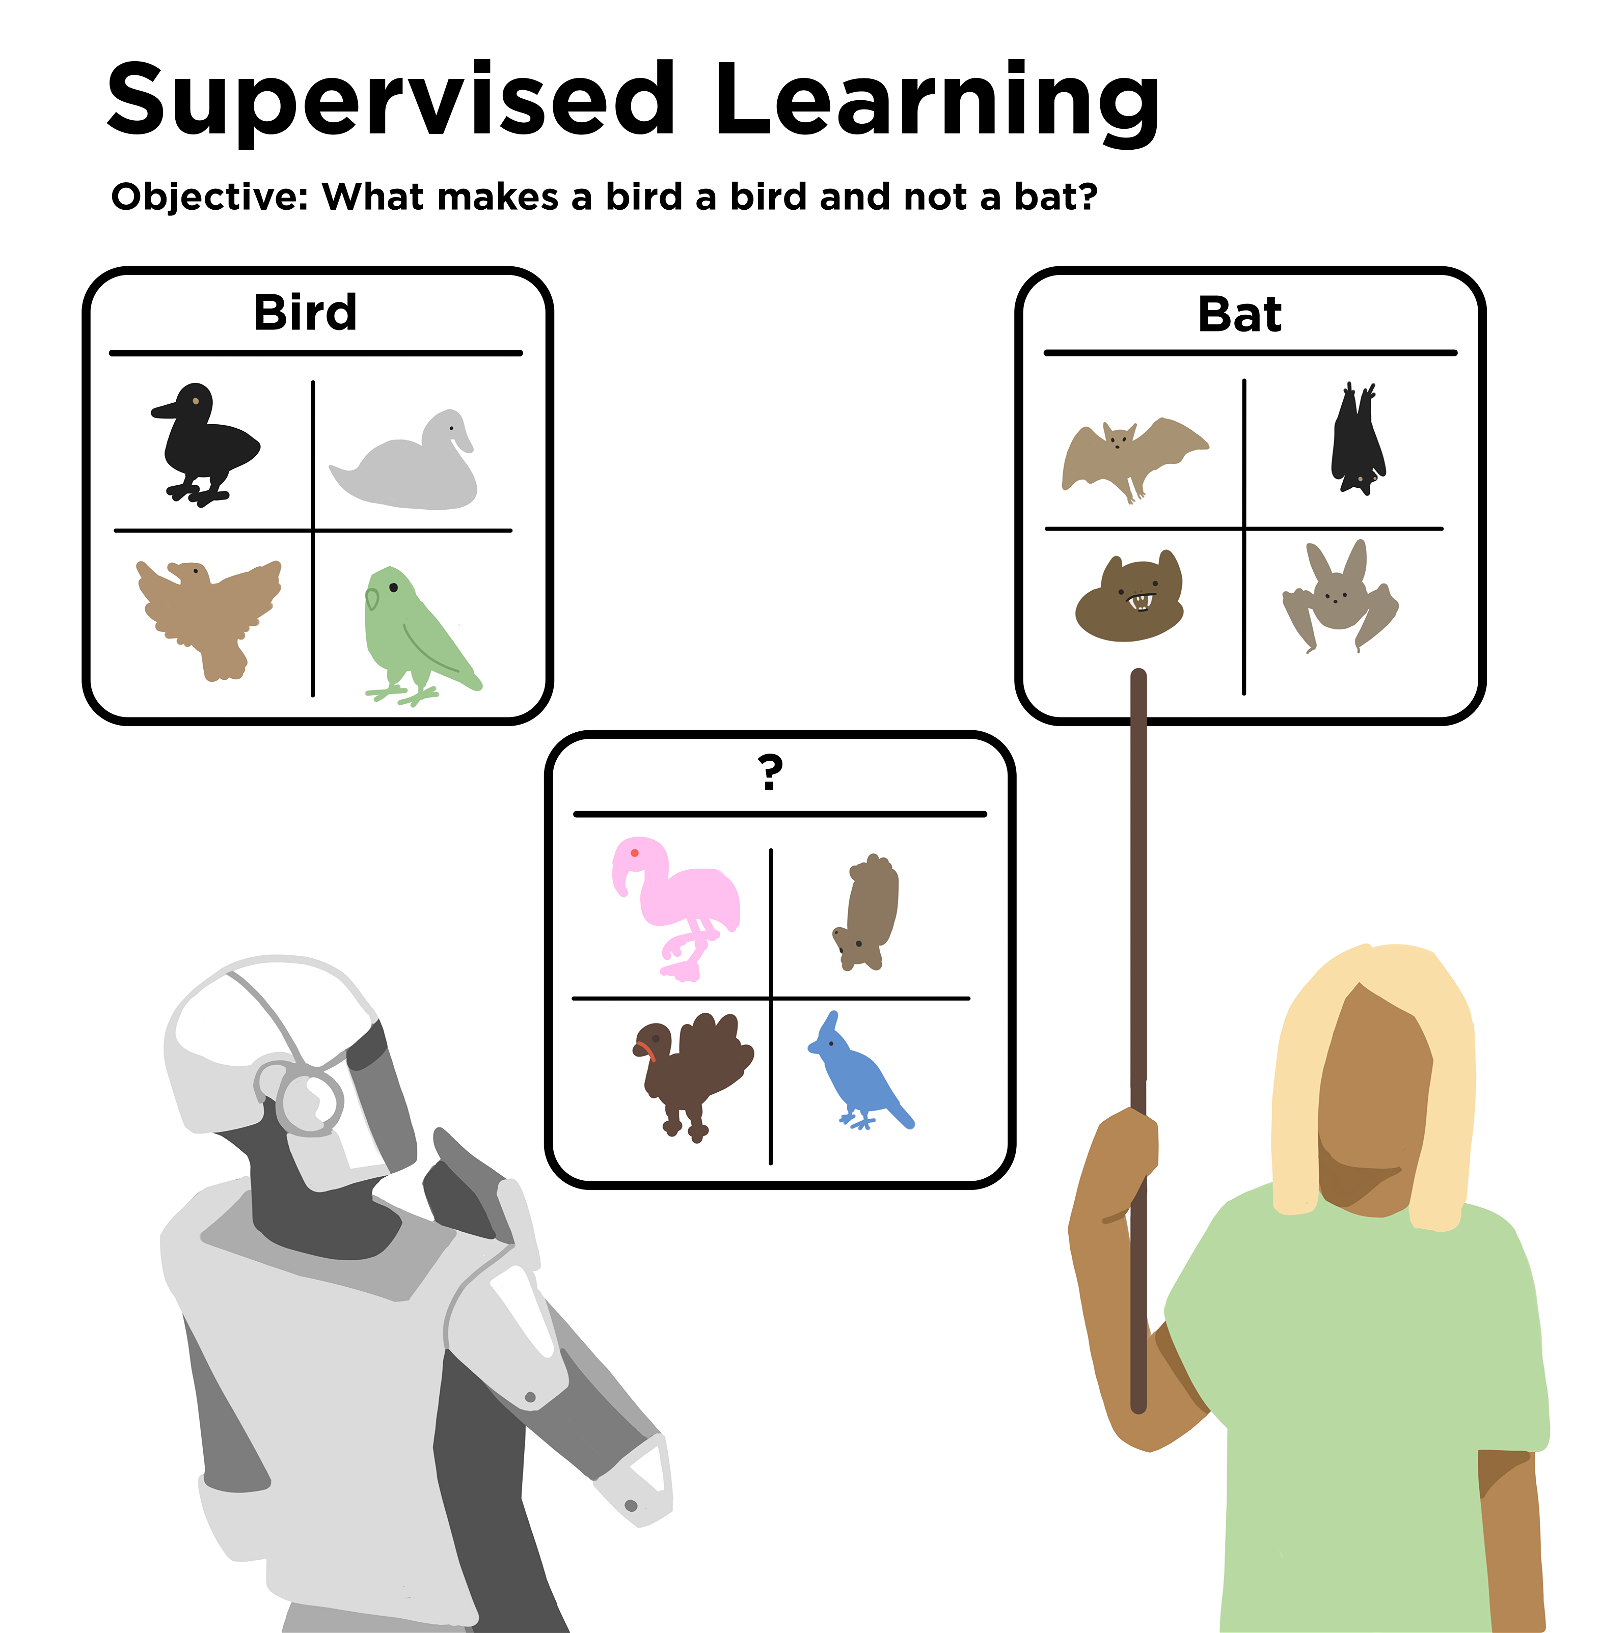 A title at the top states “Supervised Learning” with a subtitle underneath that says “Objective: What makes a bird a bird and not a bat?” A robotic humanoid figure looks at three posters while a person with a green shirt and long blond hair points with a pointer to a poster with “Bat” written above four different illustrations of bats. Another poster has “Bird” written above four illustrations of different birds. The third poster has a question mark written above four illustrations. Three of the four are birds and one is a bat.